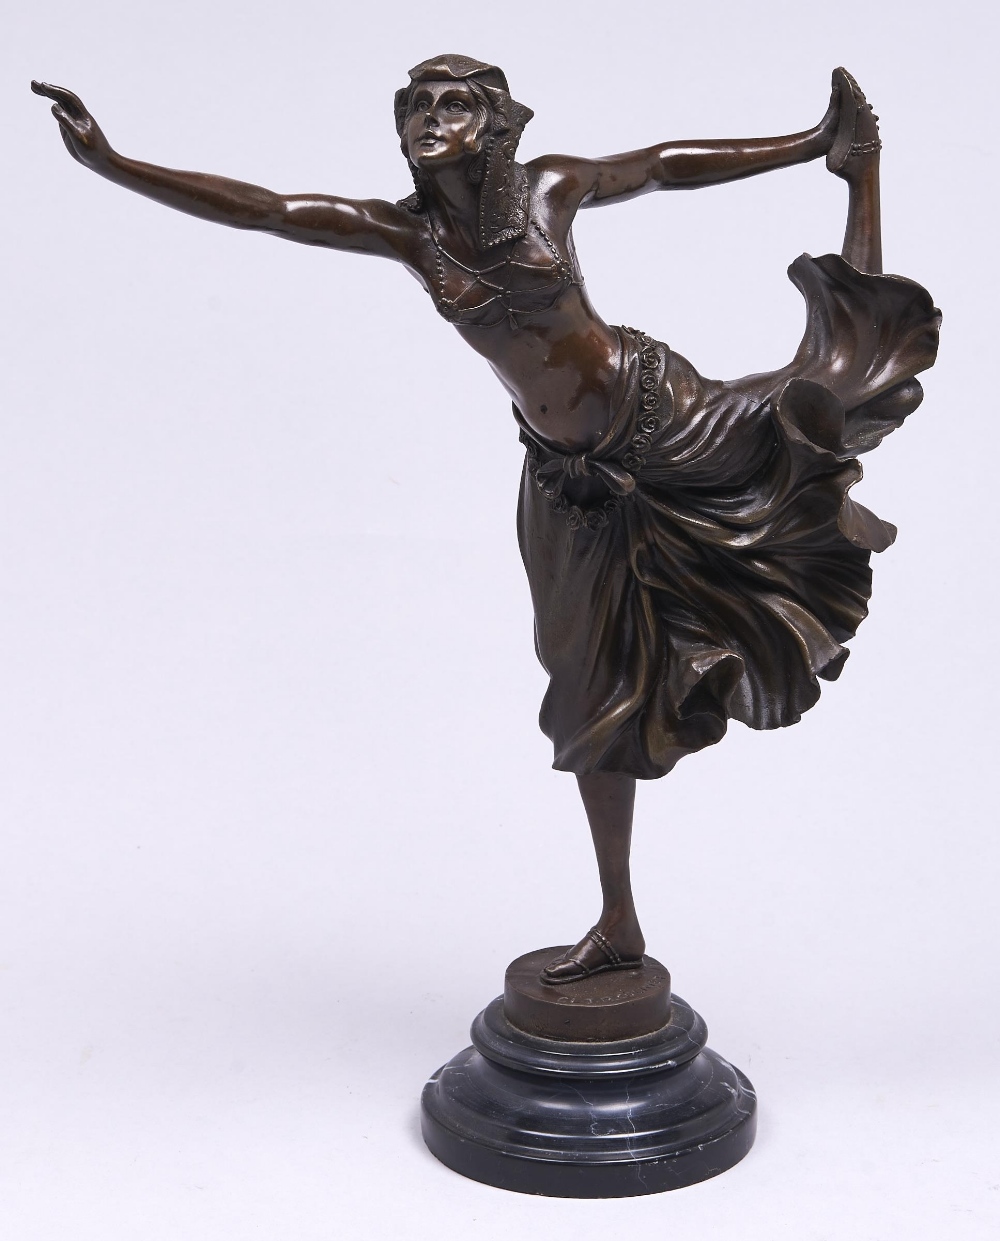 A bronze statuette of an Egyptian dancer cast from a model by Claire Jeanne Roberte Colinet, rich